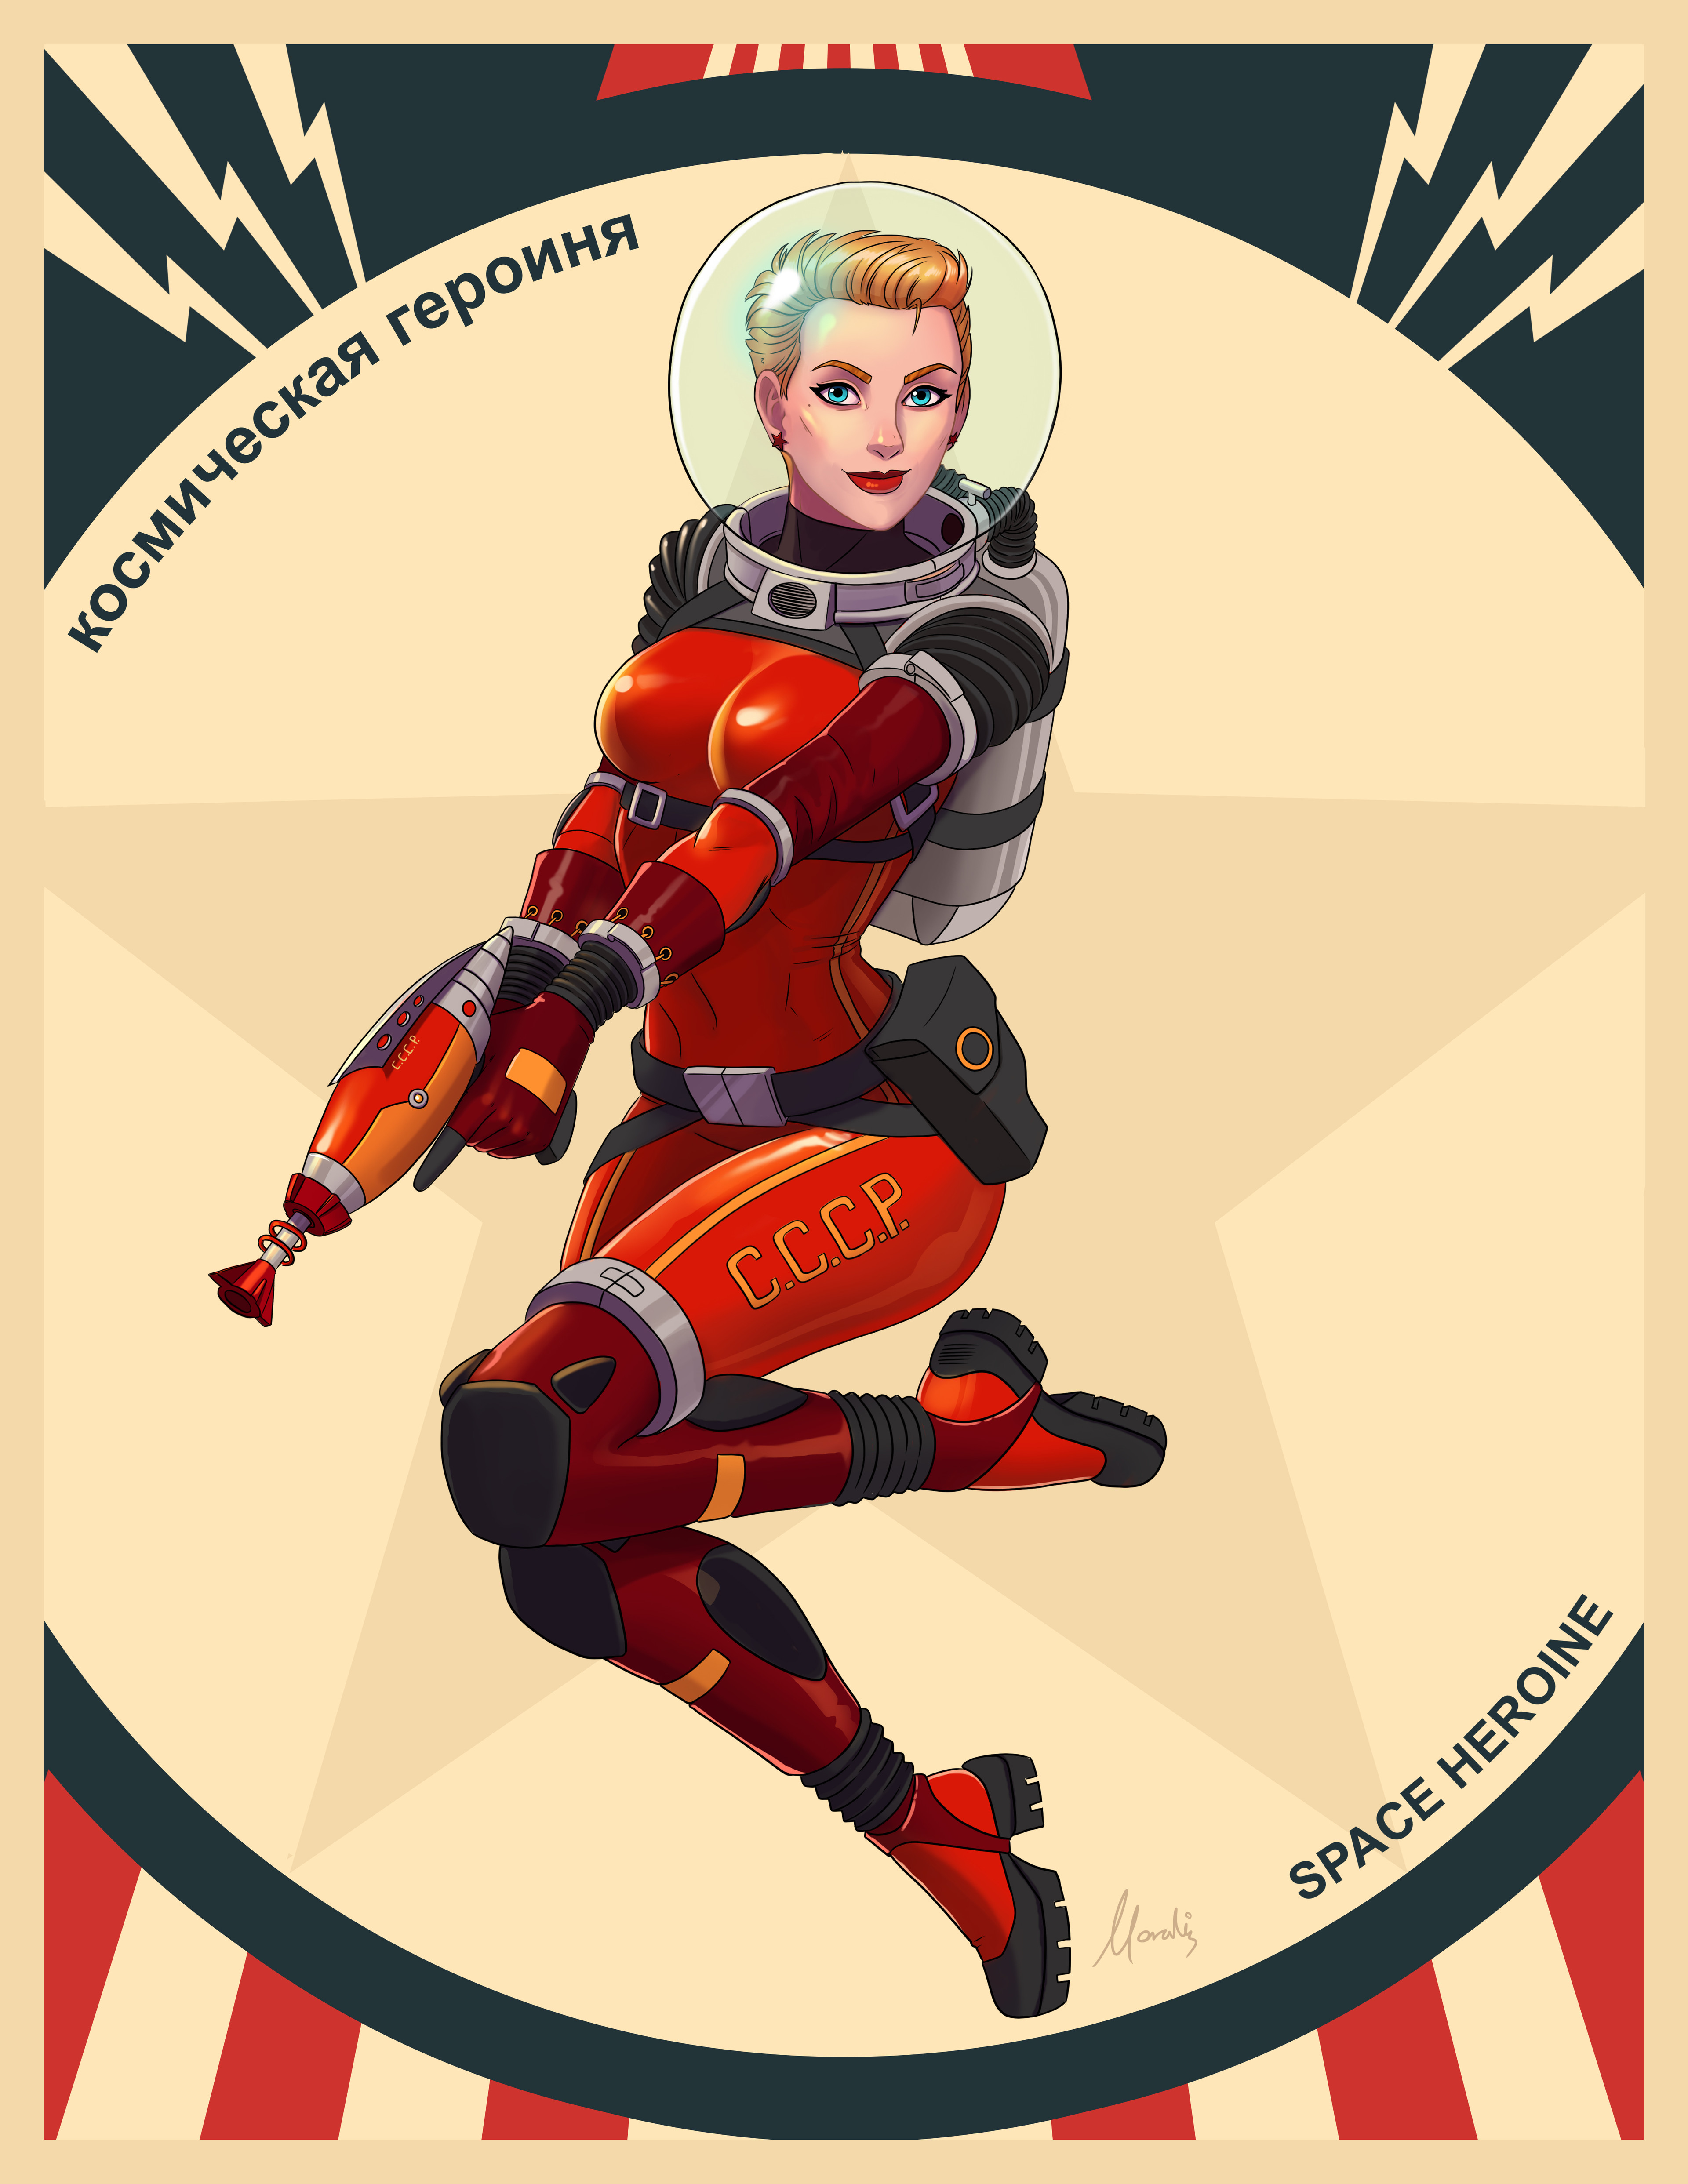 Astro Pinup 3, this one was inspired by russian constructivism and old propaganda posters.